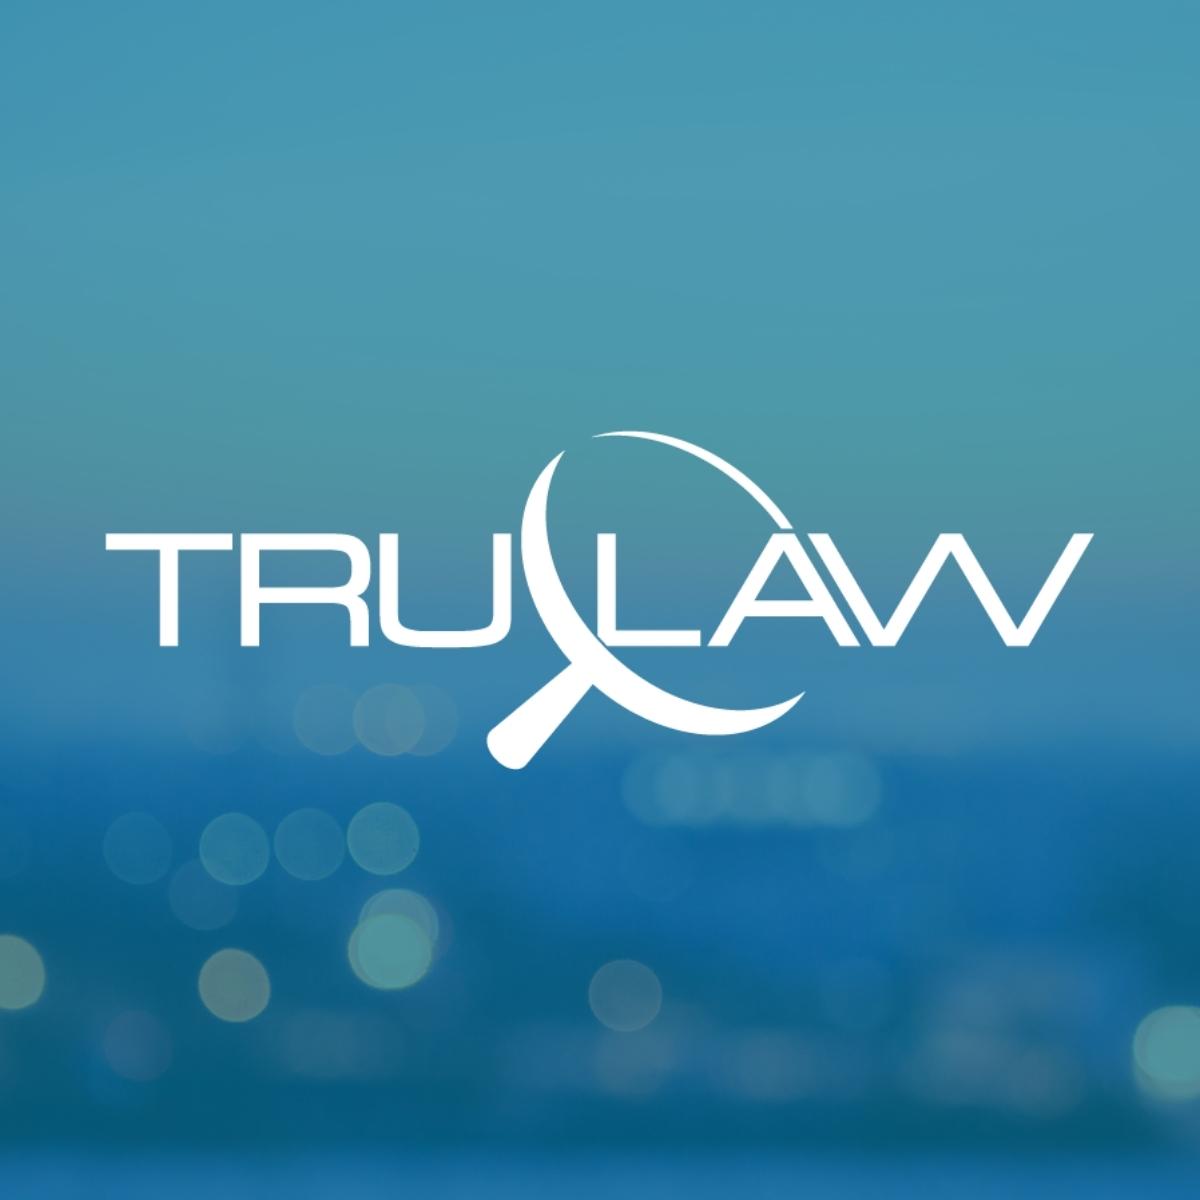 Introducing TruLaw